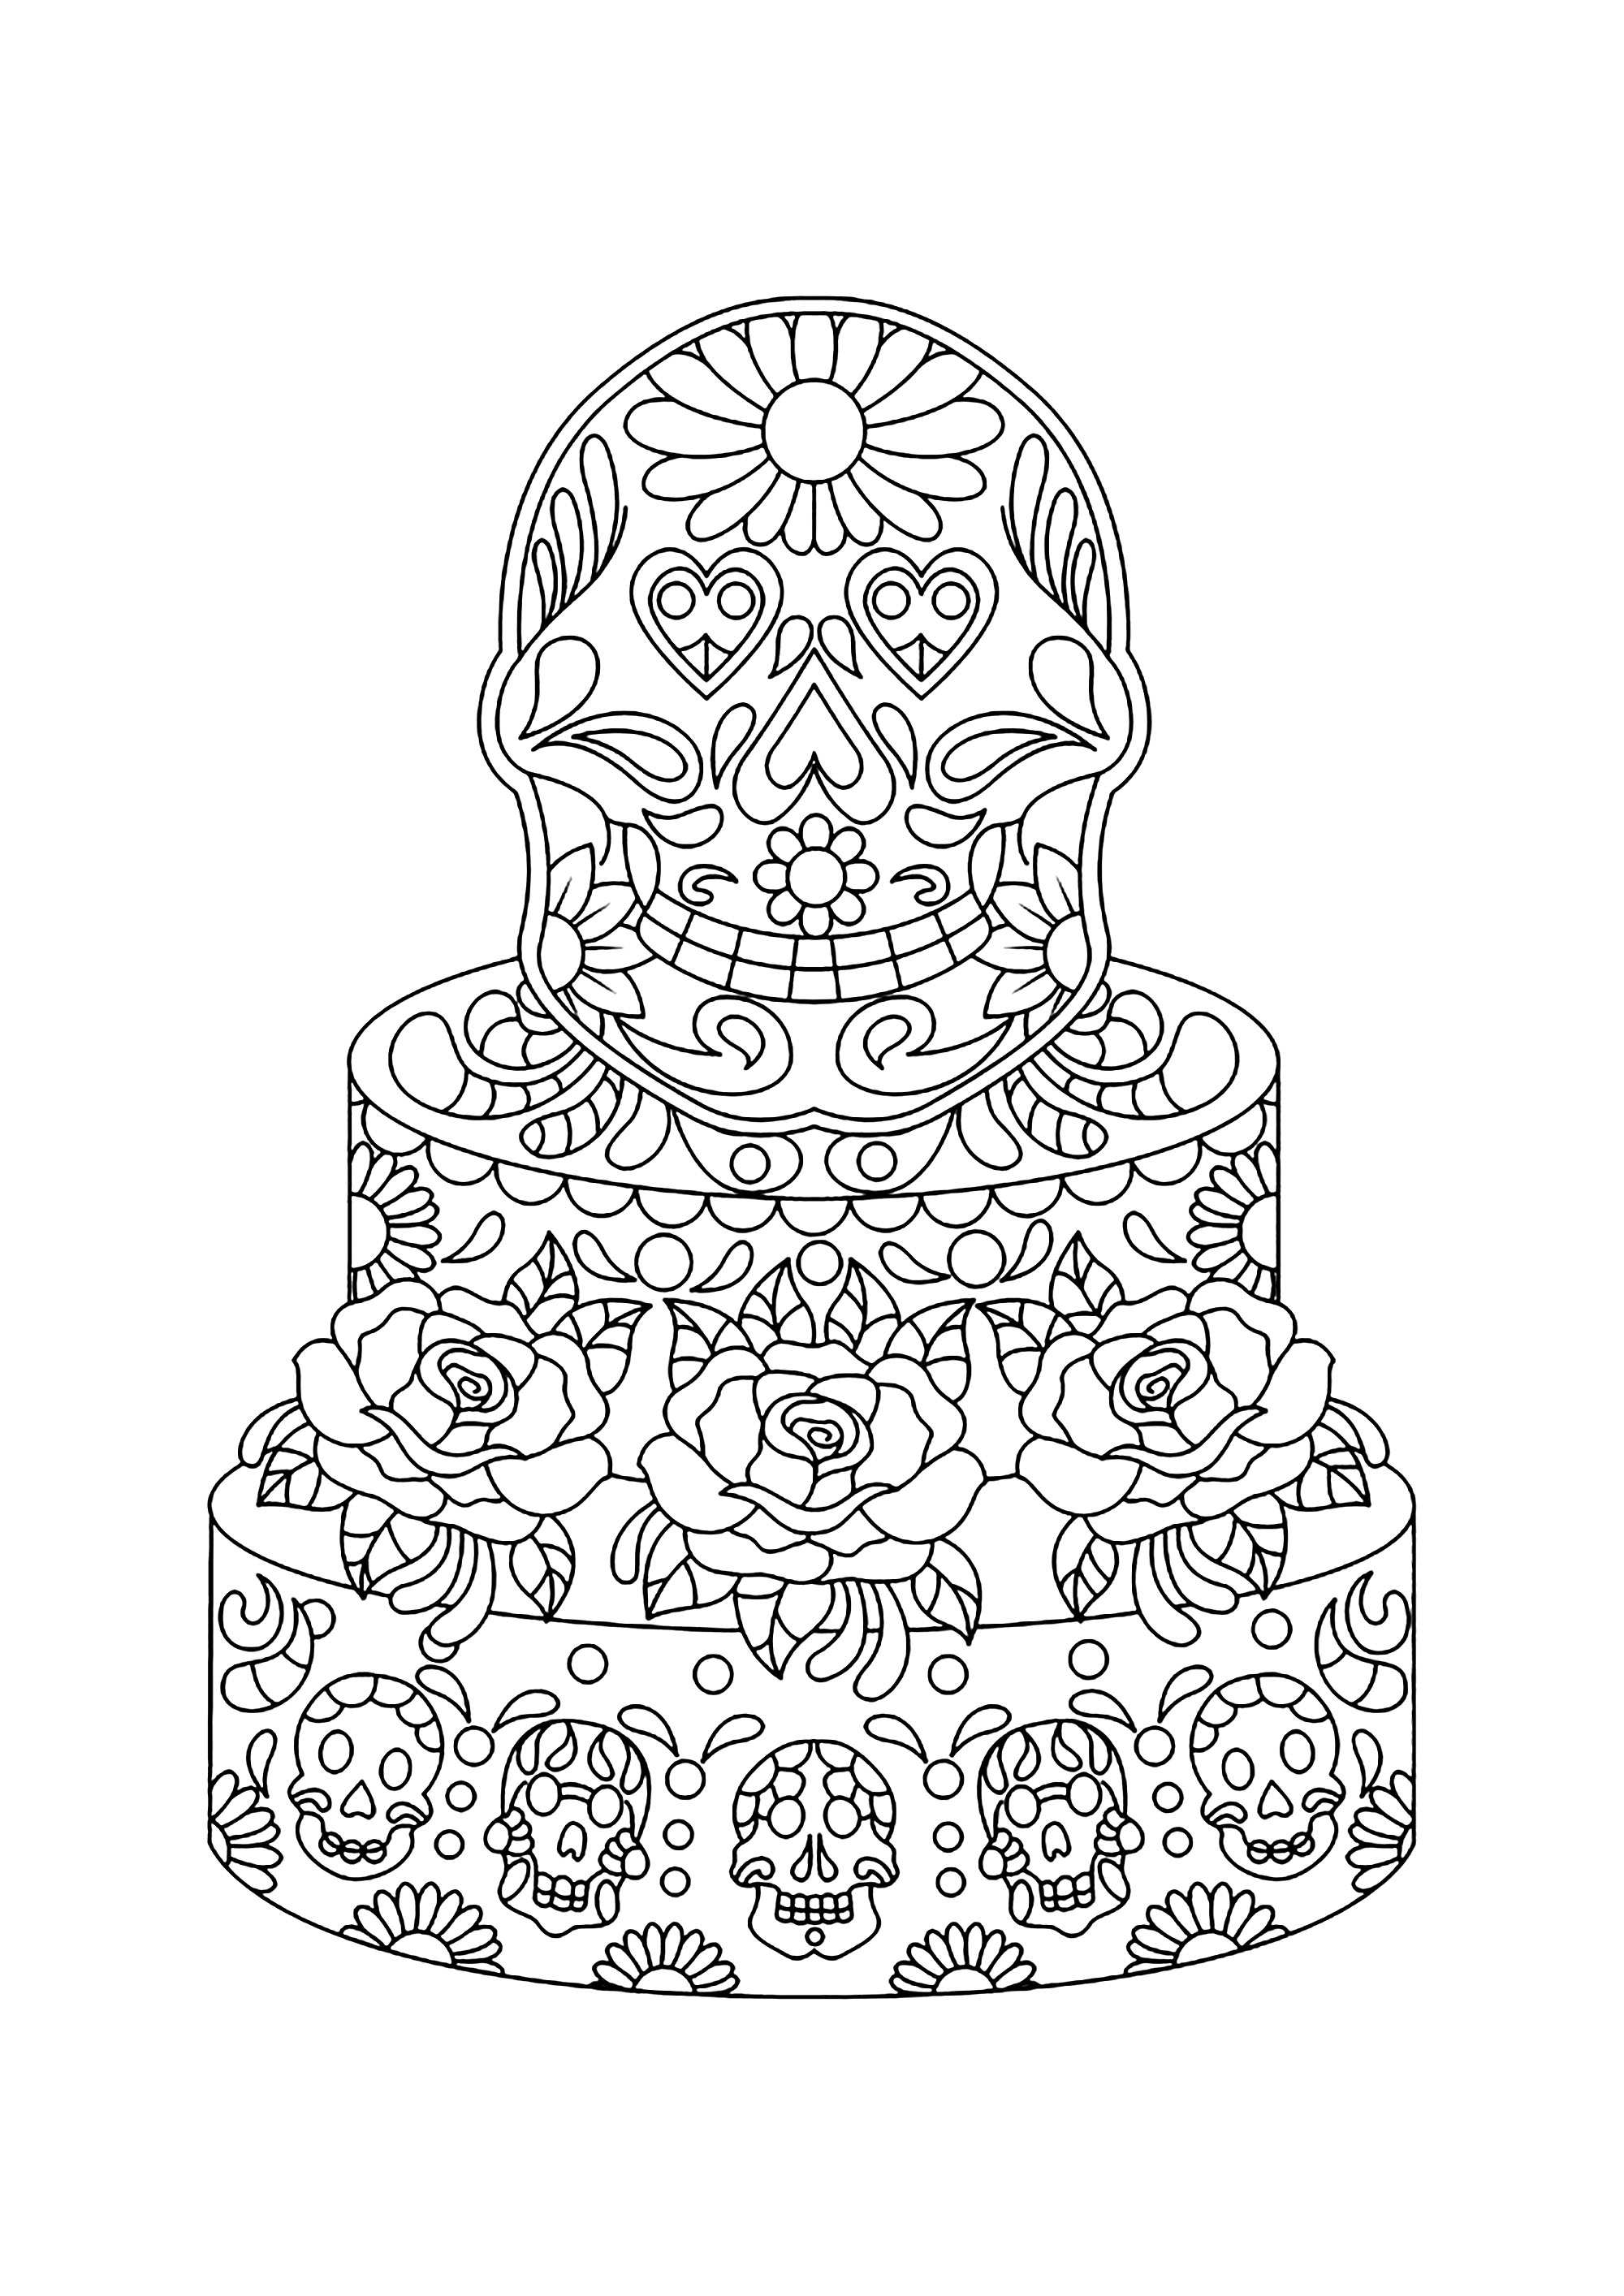 With its large Mexican masks, this coloring page will make you travel to Dia de los Muertos!. Delicate details and a harmonious style contribute to the beauty of this coloring drawing. You'll love coloring it in and feel like you're in Mexico on the Day of the Dead! So, ready to get started?, Artist : Sachin Sachdeva   Source : 123rf